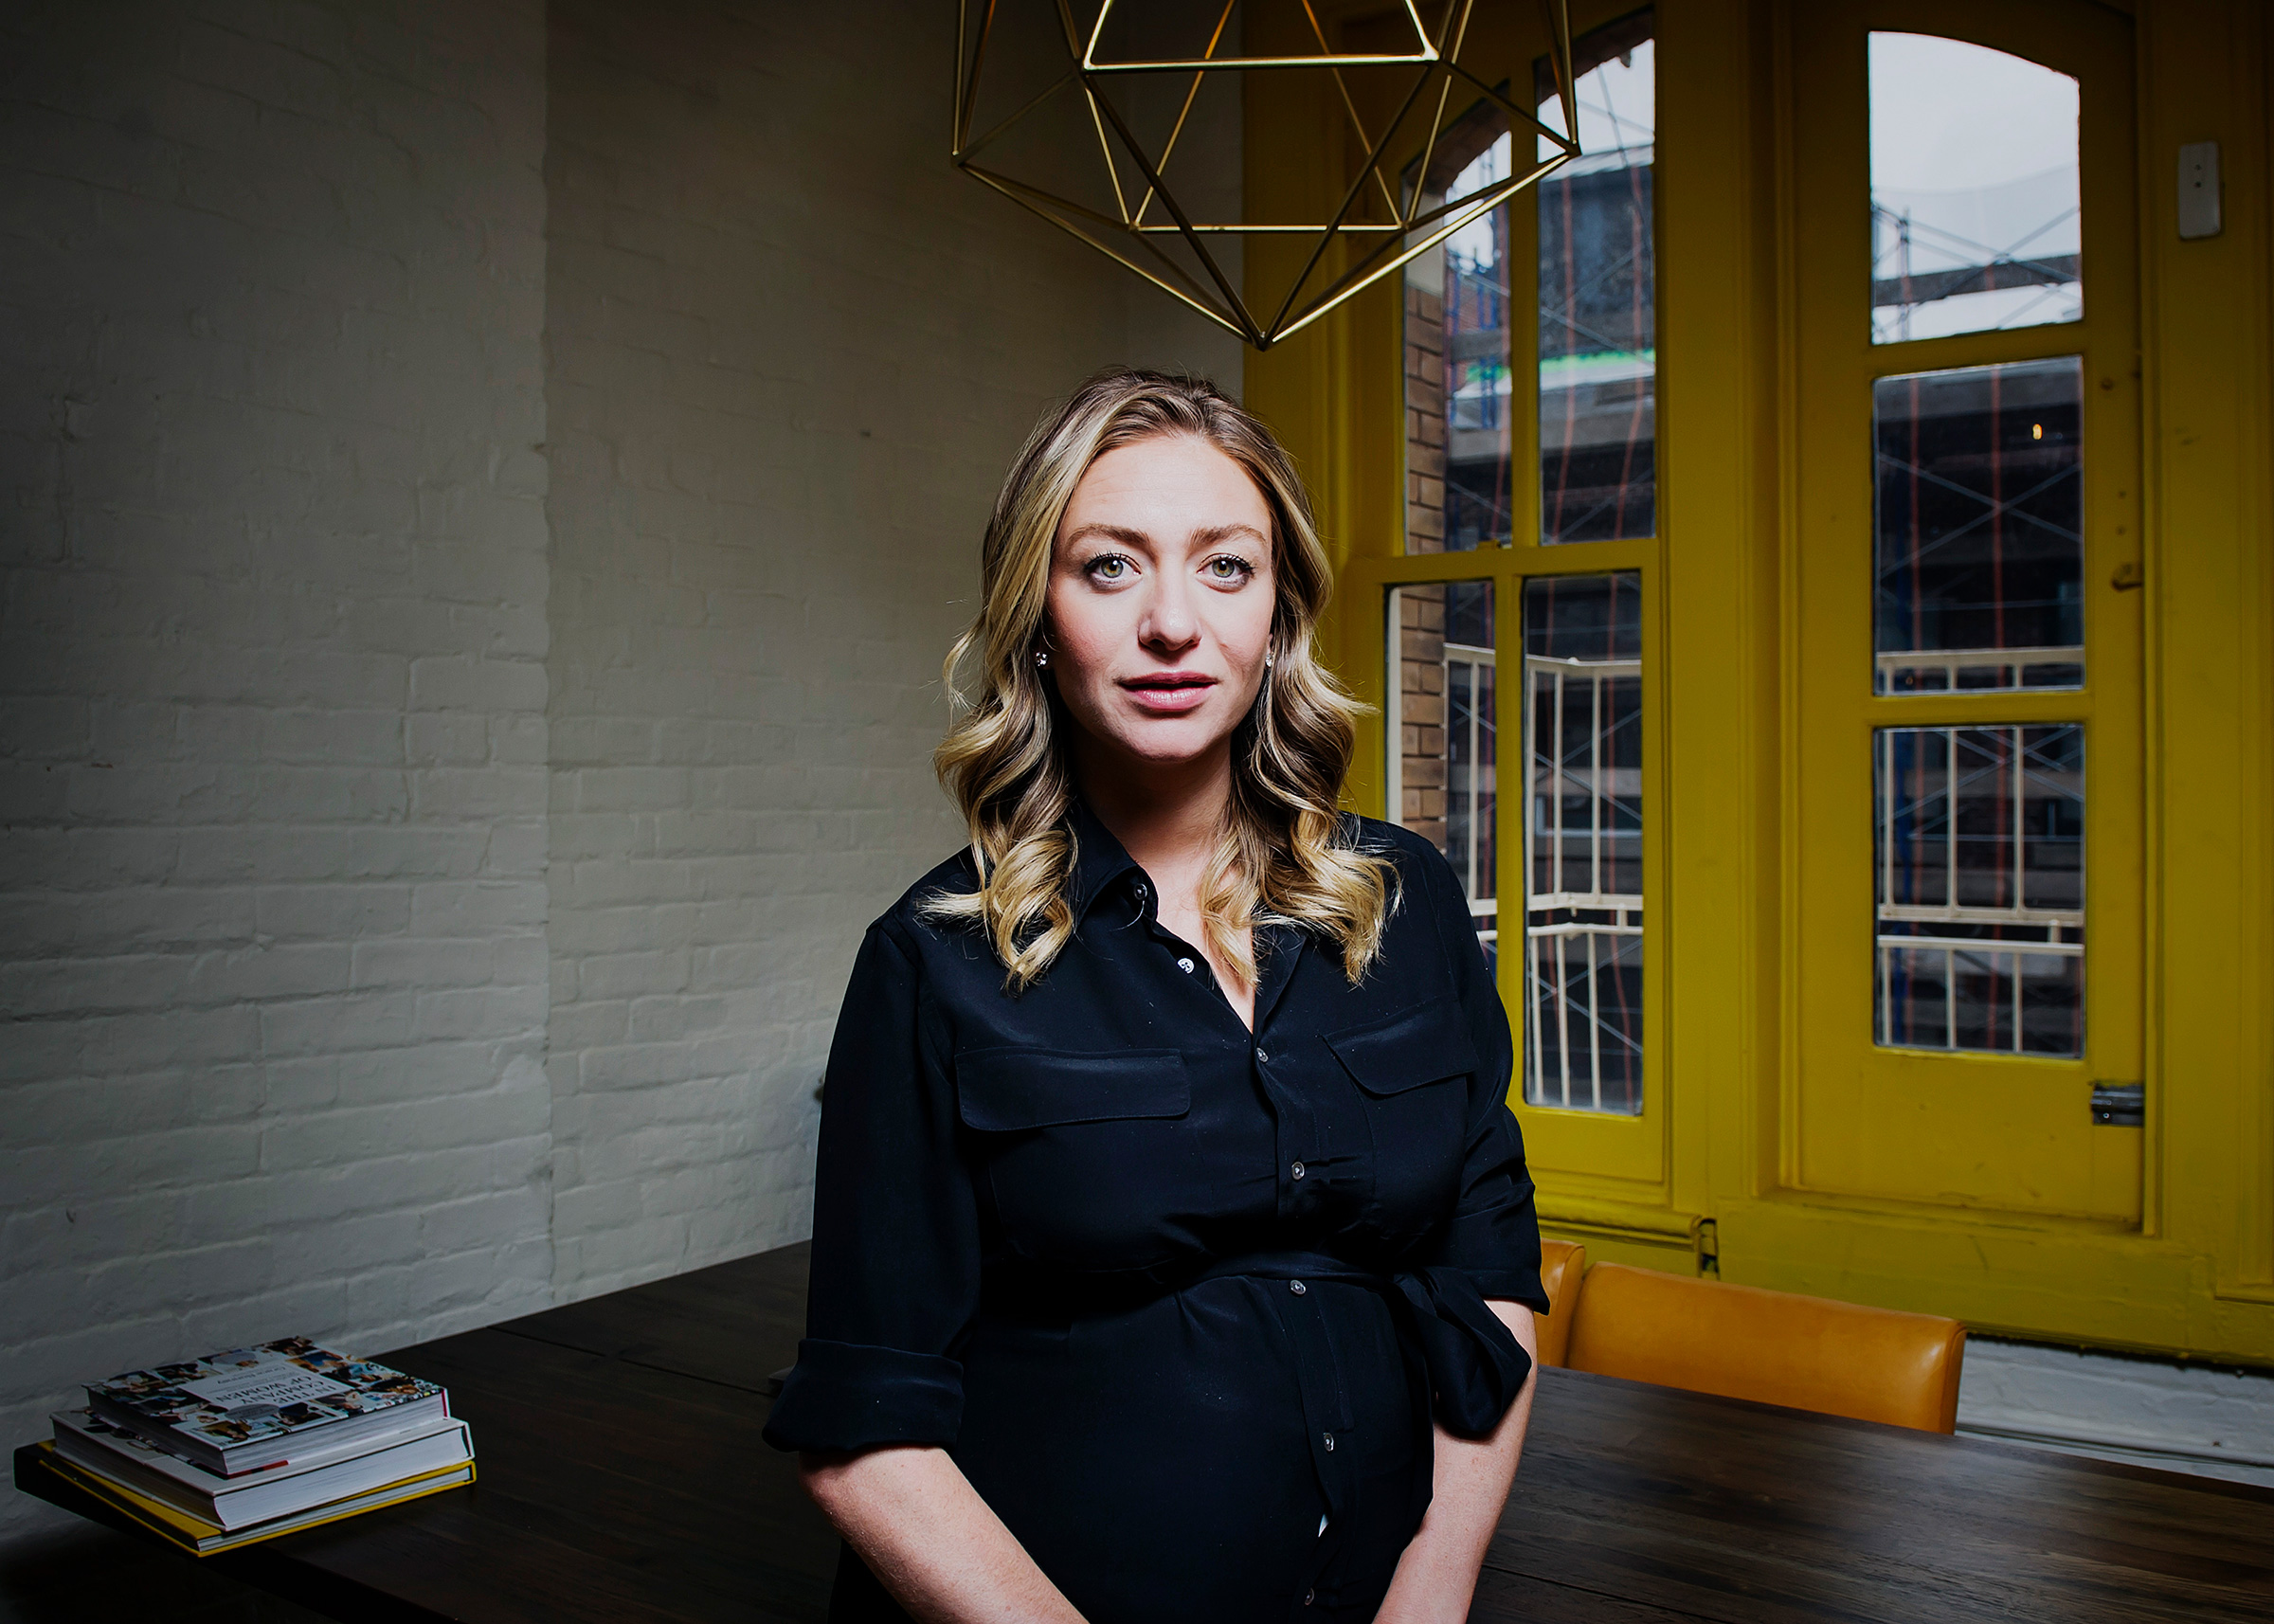 Bumble founder, Whitney Wolfe Herd, photographed in her offices in Soho, New York City in 2019. (Dina Litovsky—Redux)